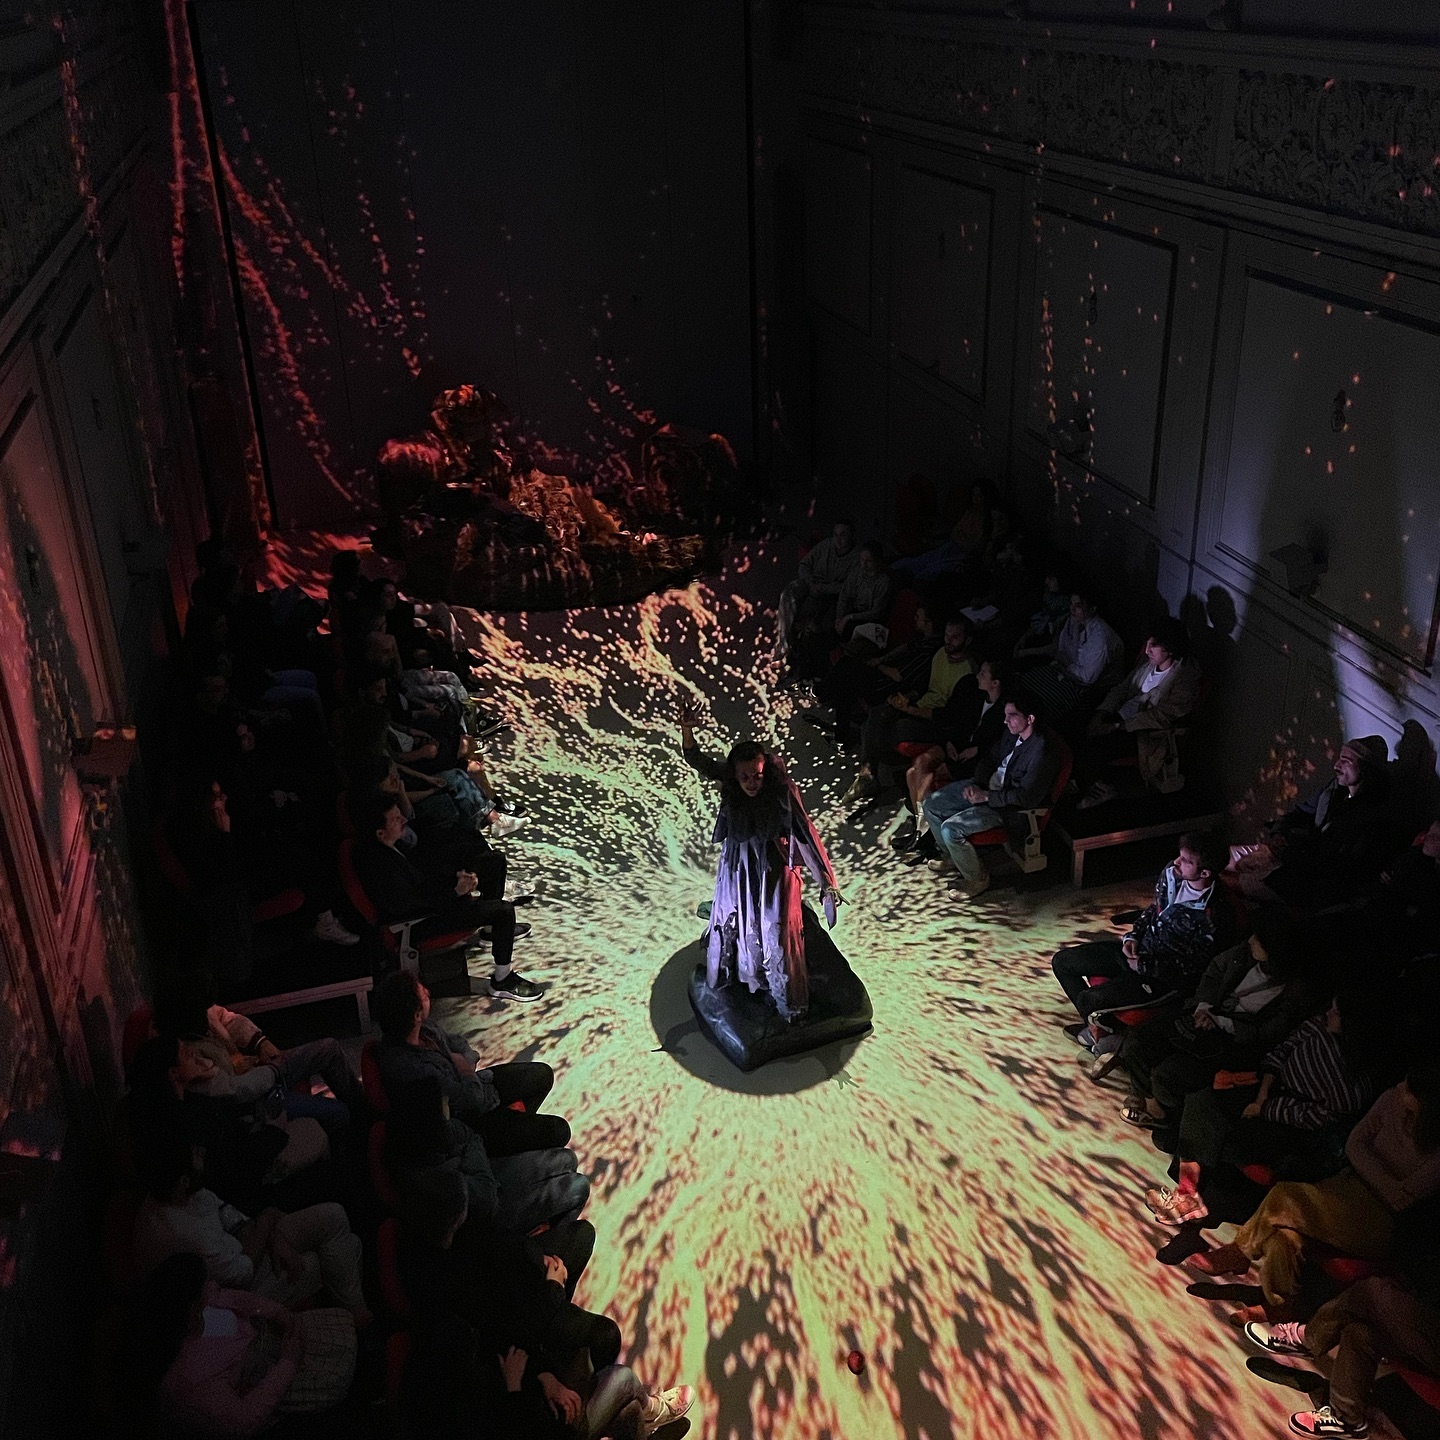 Photo from play named Çirkin theatre. Nihal Yalçın standing in the middle of immersive experience.